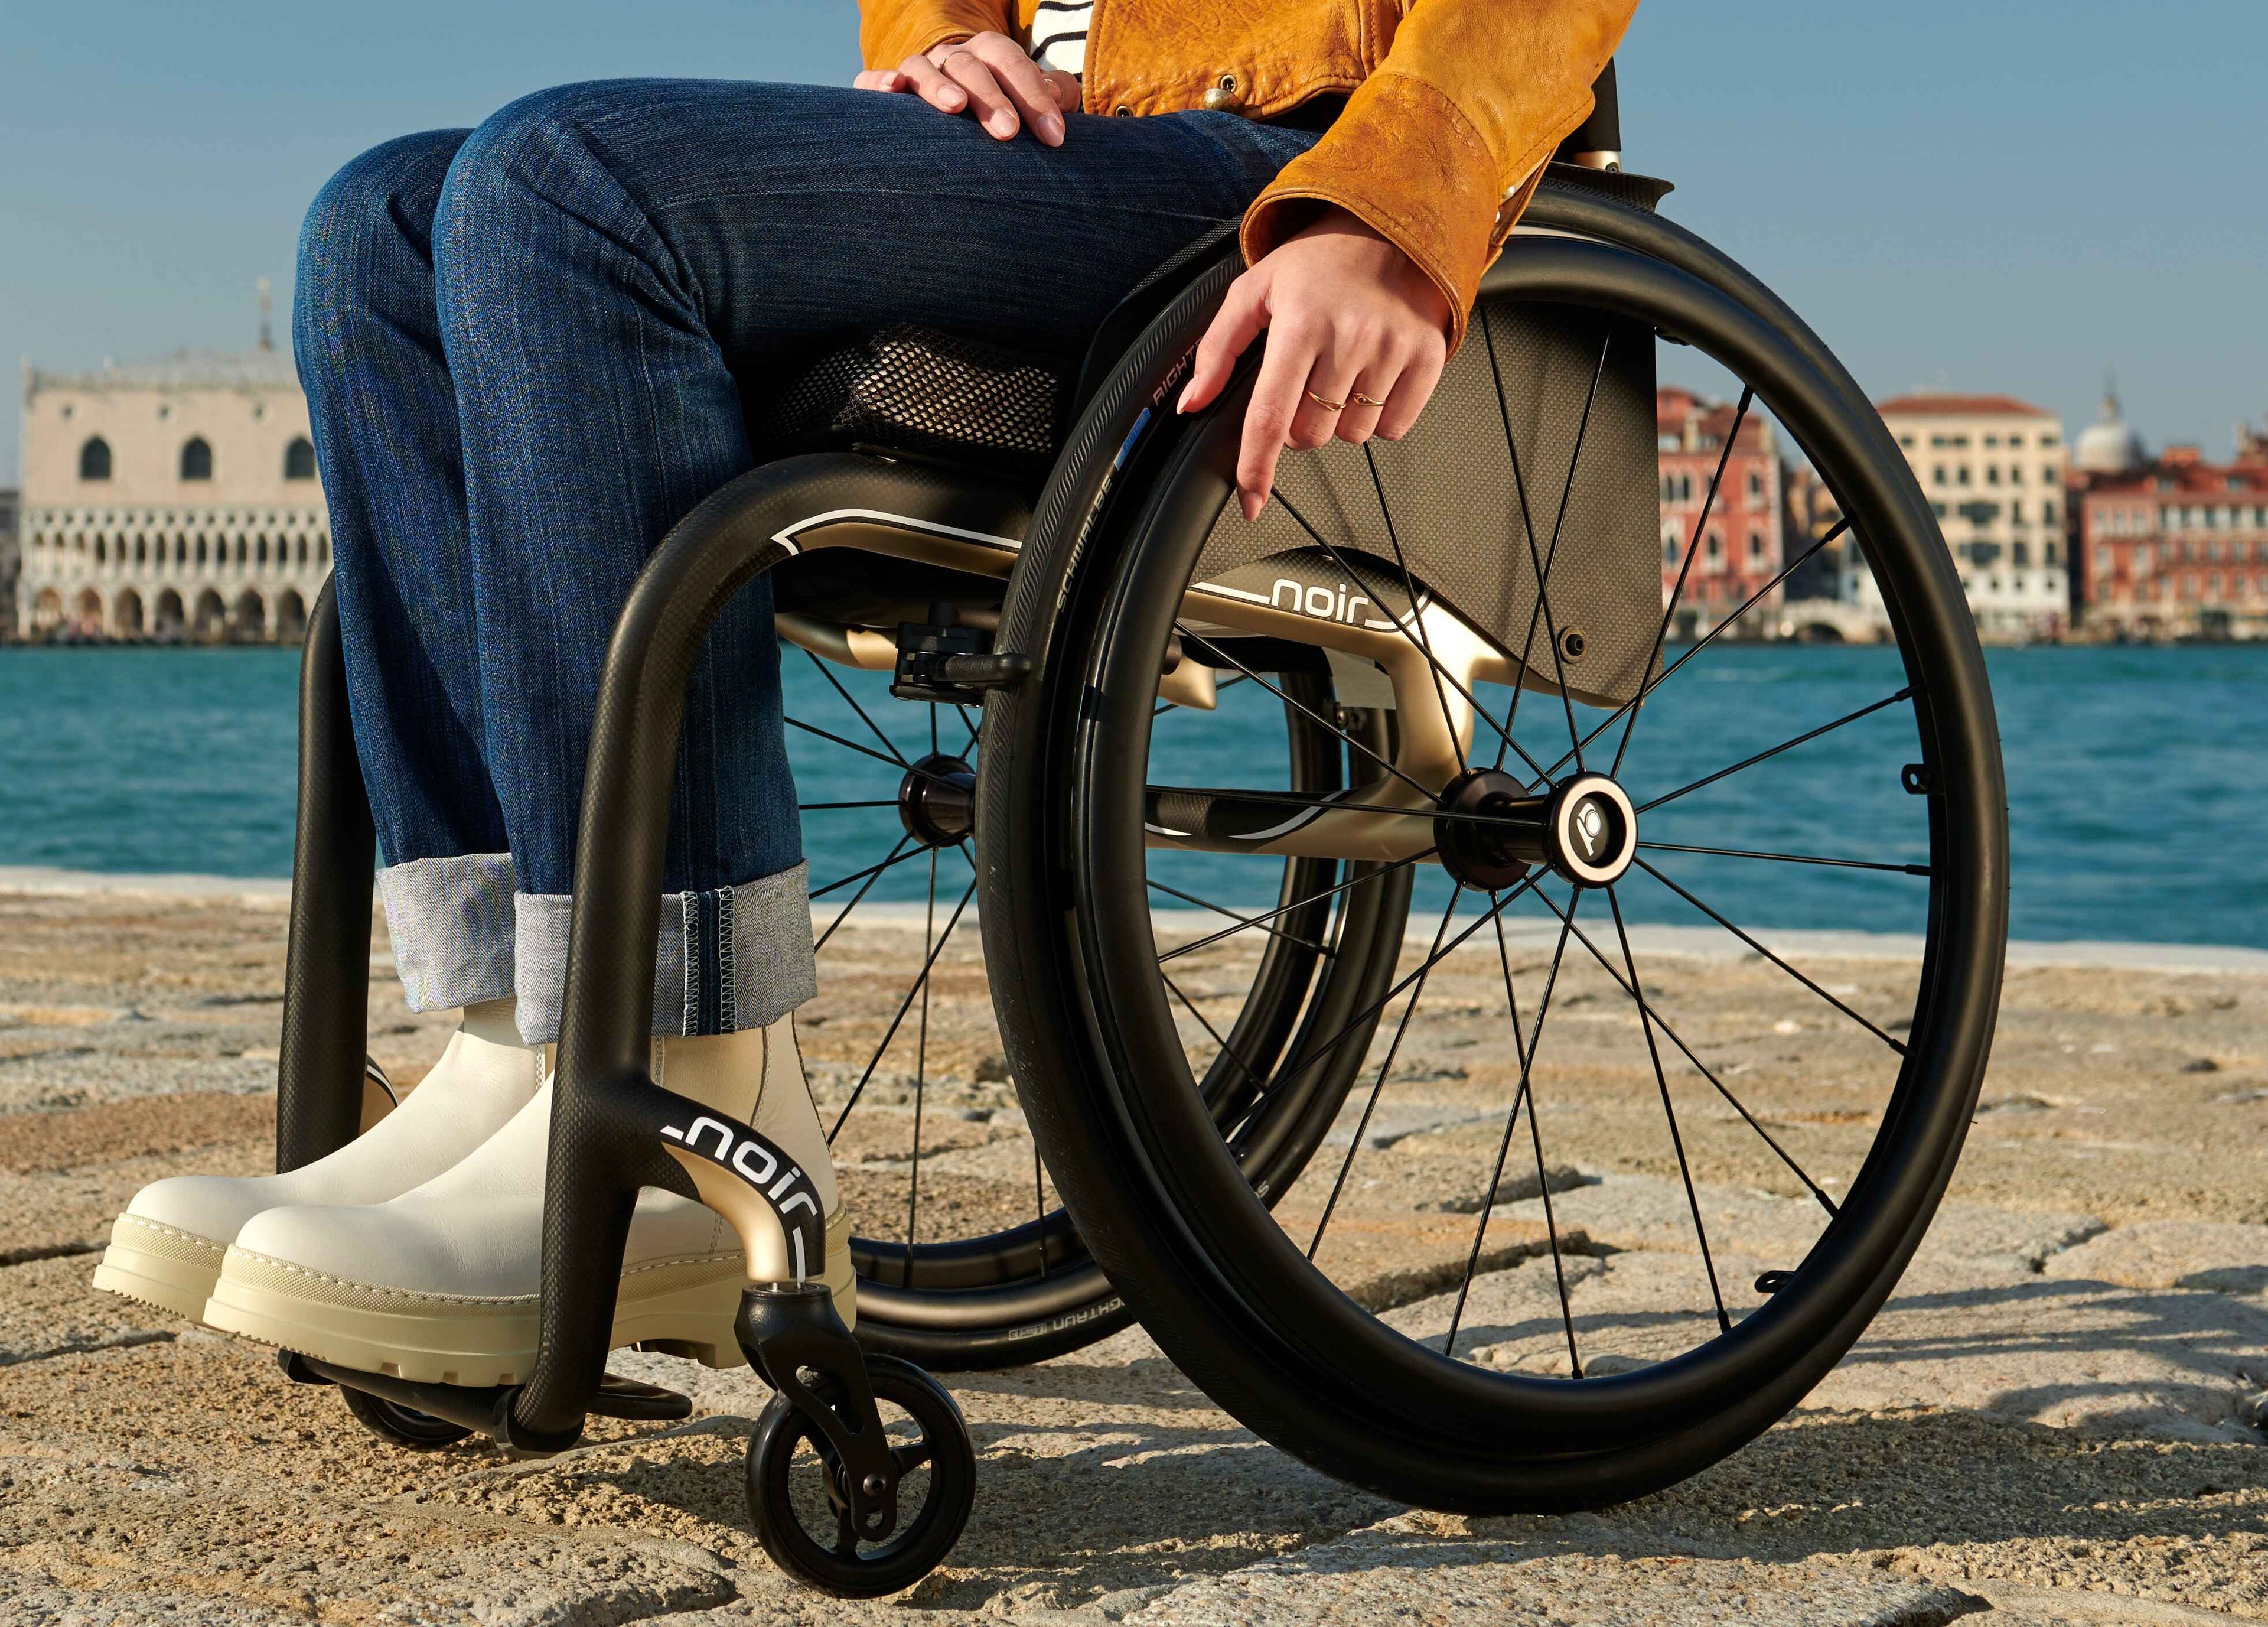 Used Manual Wheelchairs - Beyond Mobility.